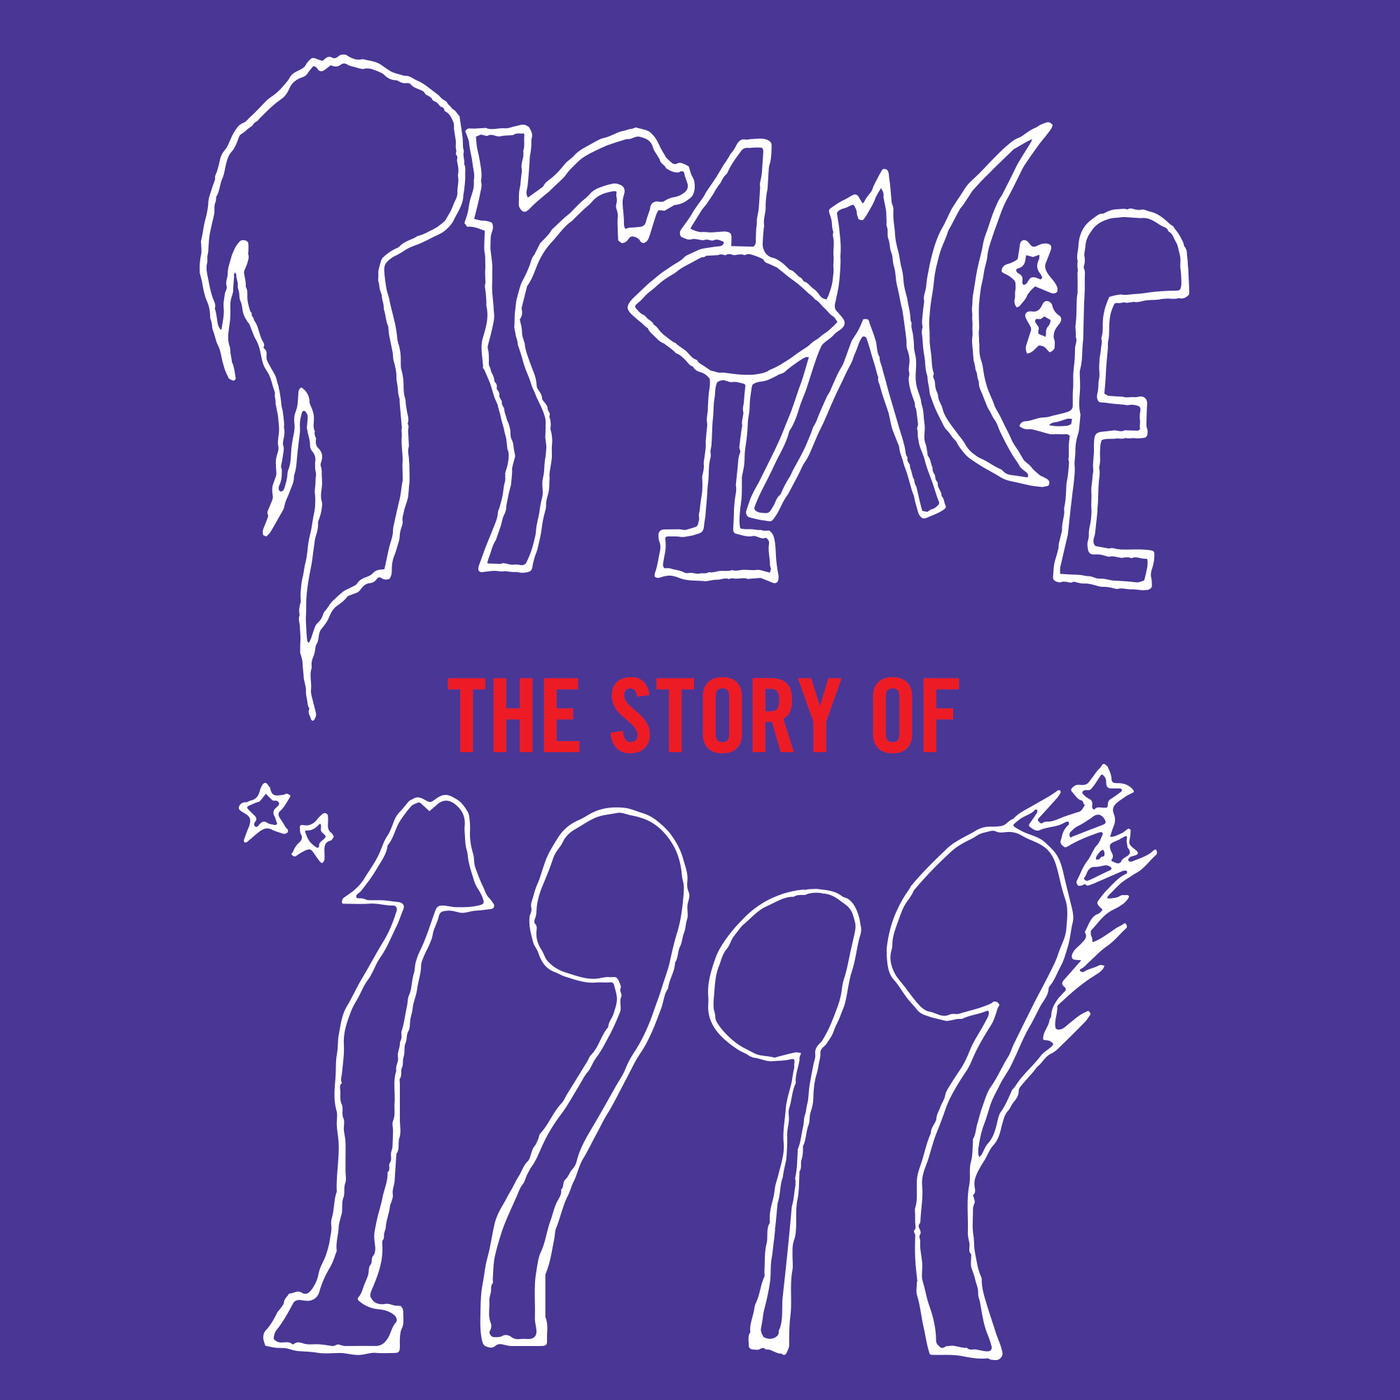 Prince: The Story of 1999, Episode 4: Let's Work